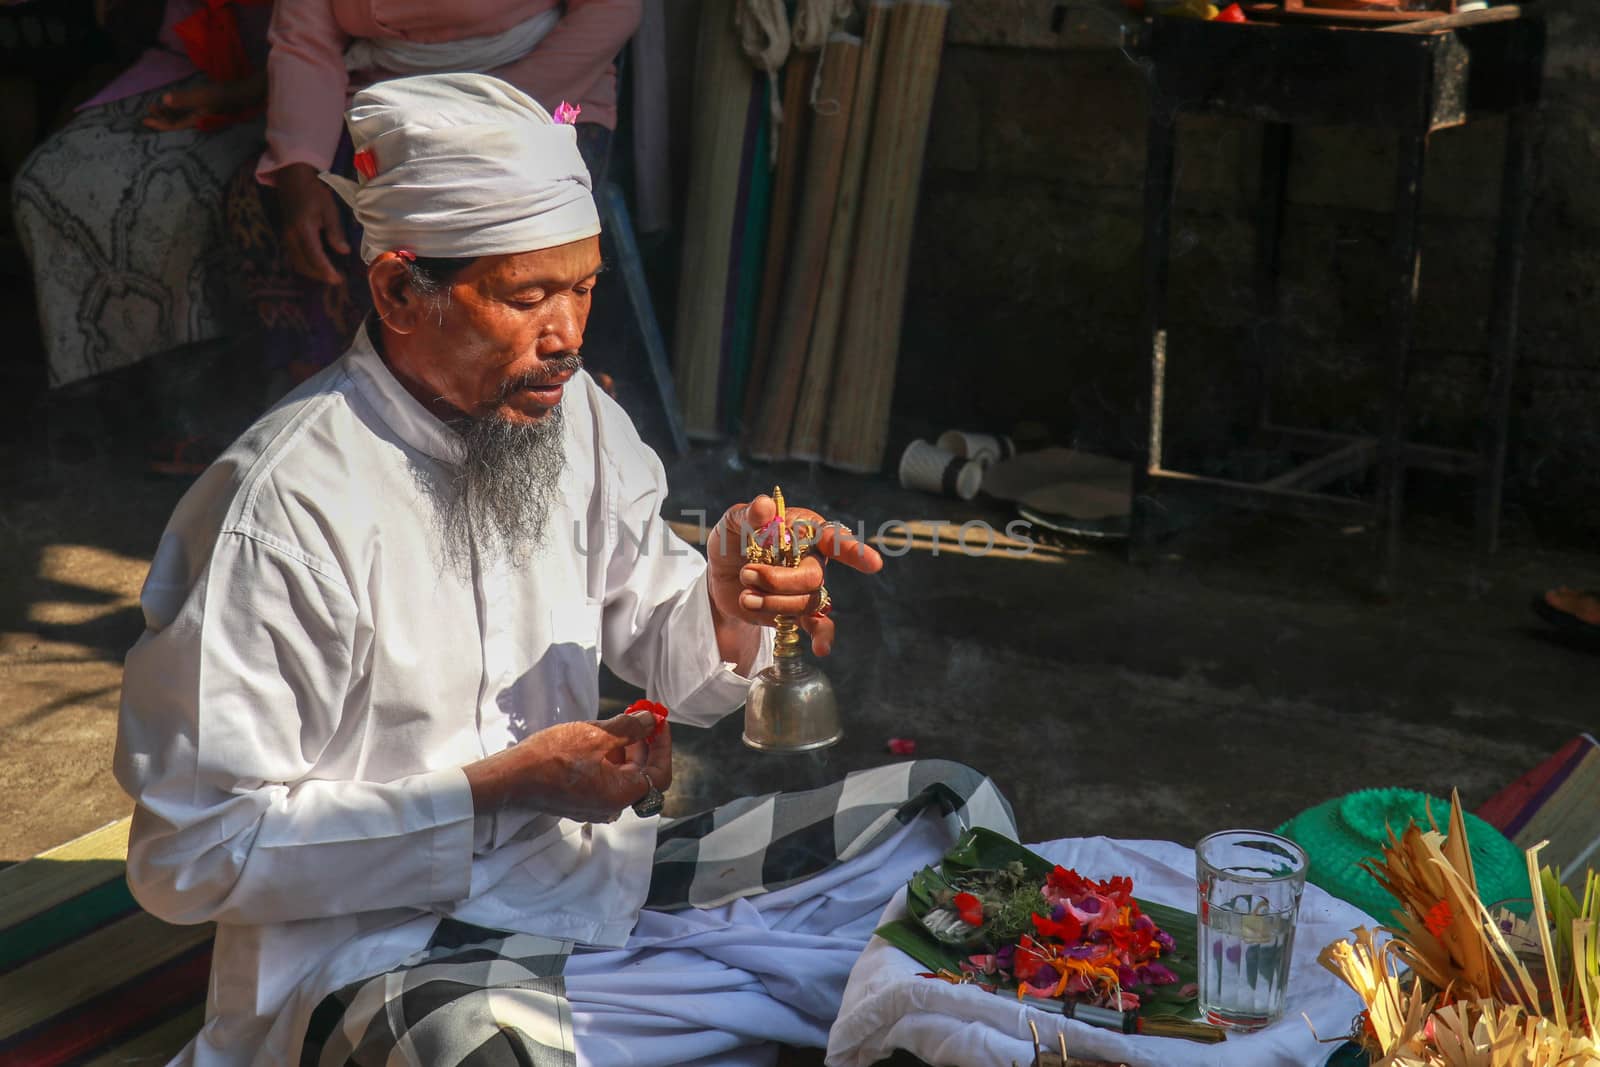 Hindu priest wearing a white uniform was carrying out a religious ceremony with a melodious chime and a beautiful and peaceful chant.